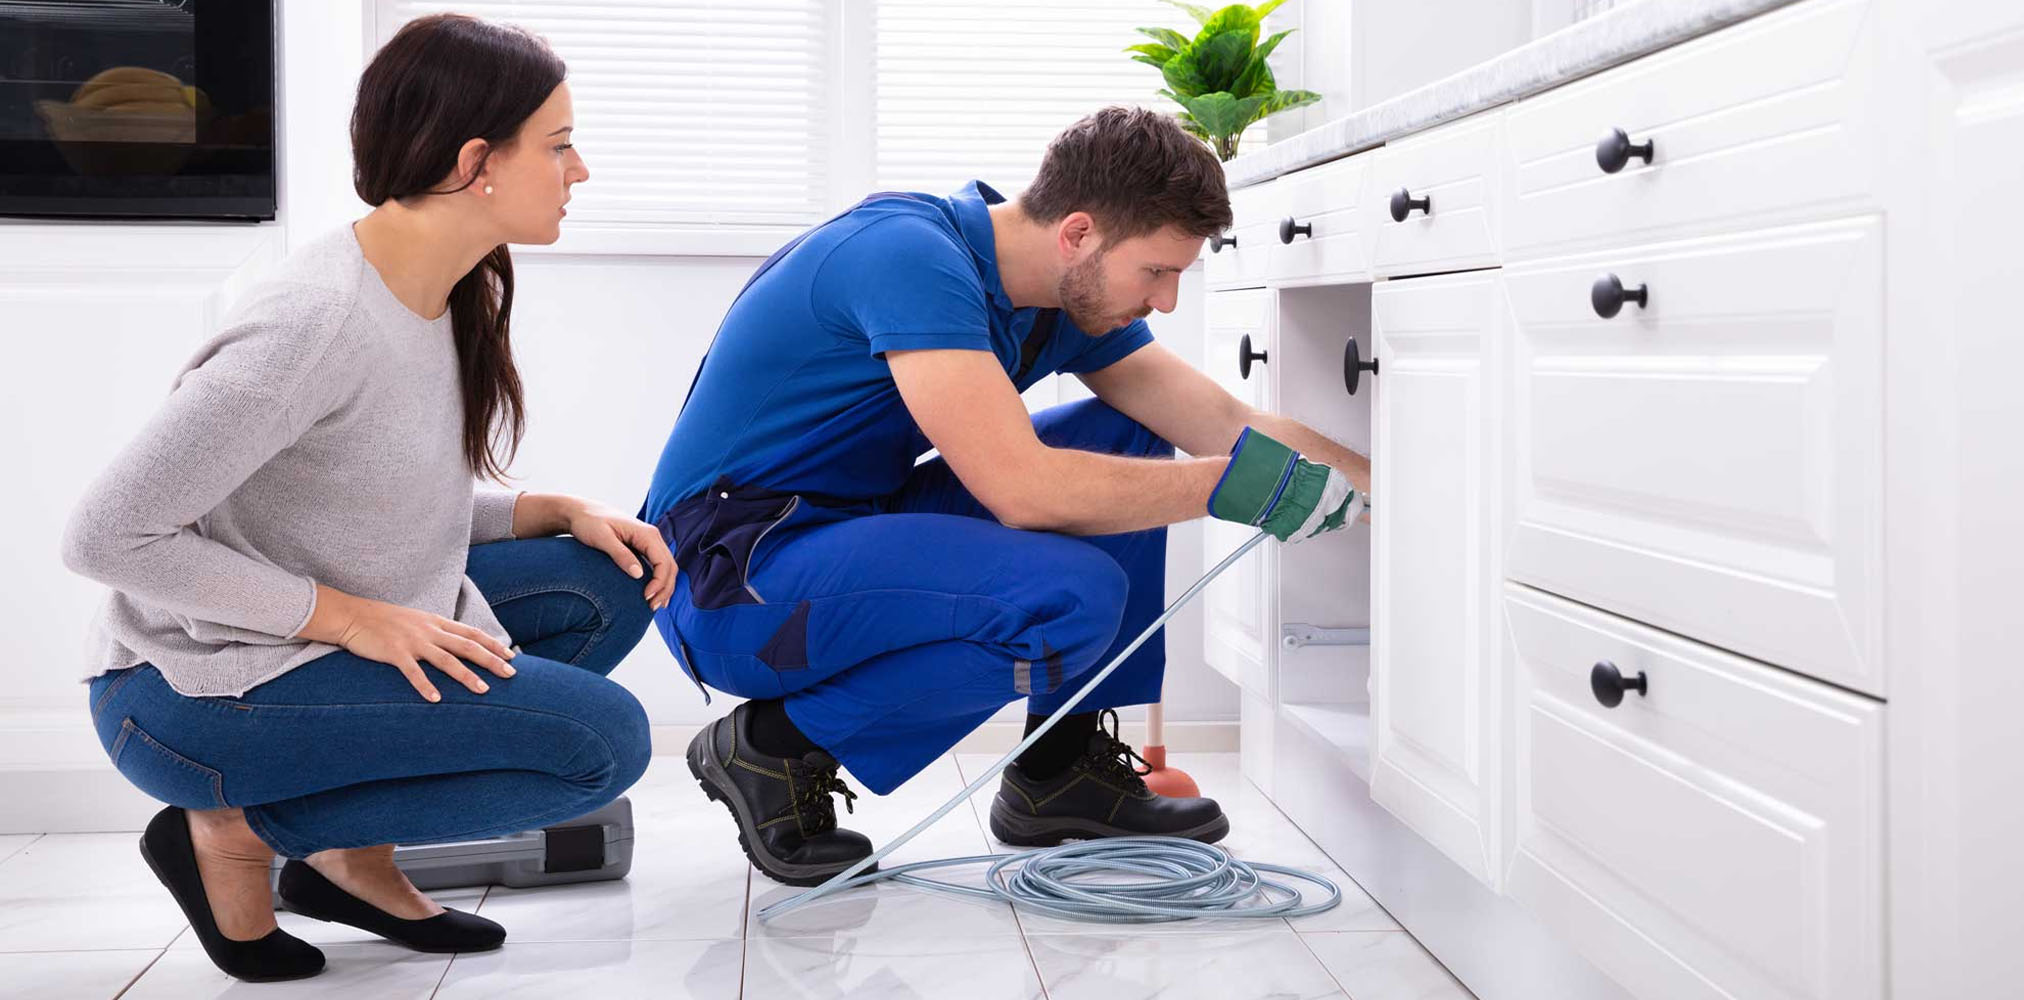 Spotless Handyman Services in New York and Long Island